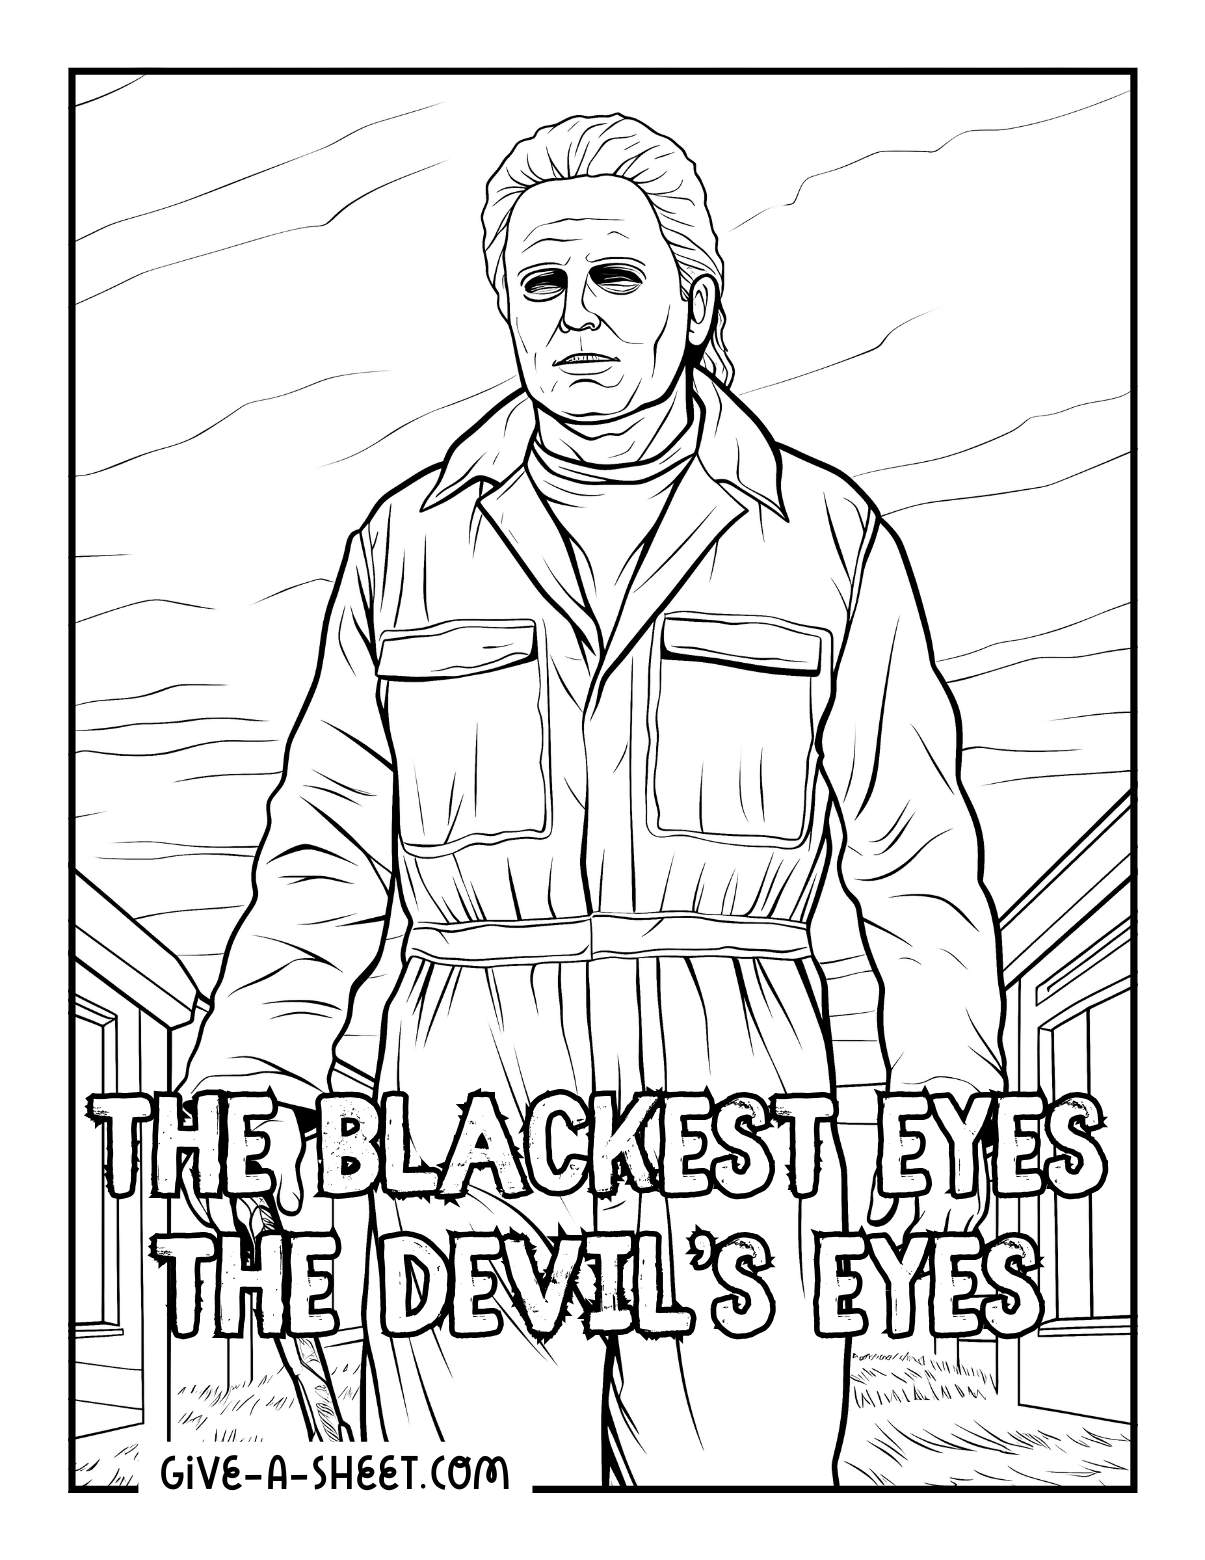 Boogeyman Michael Myers coloring page.